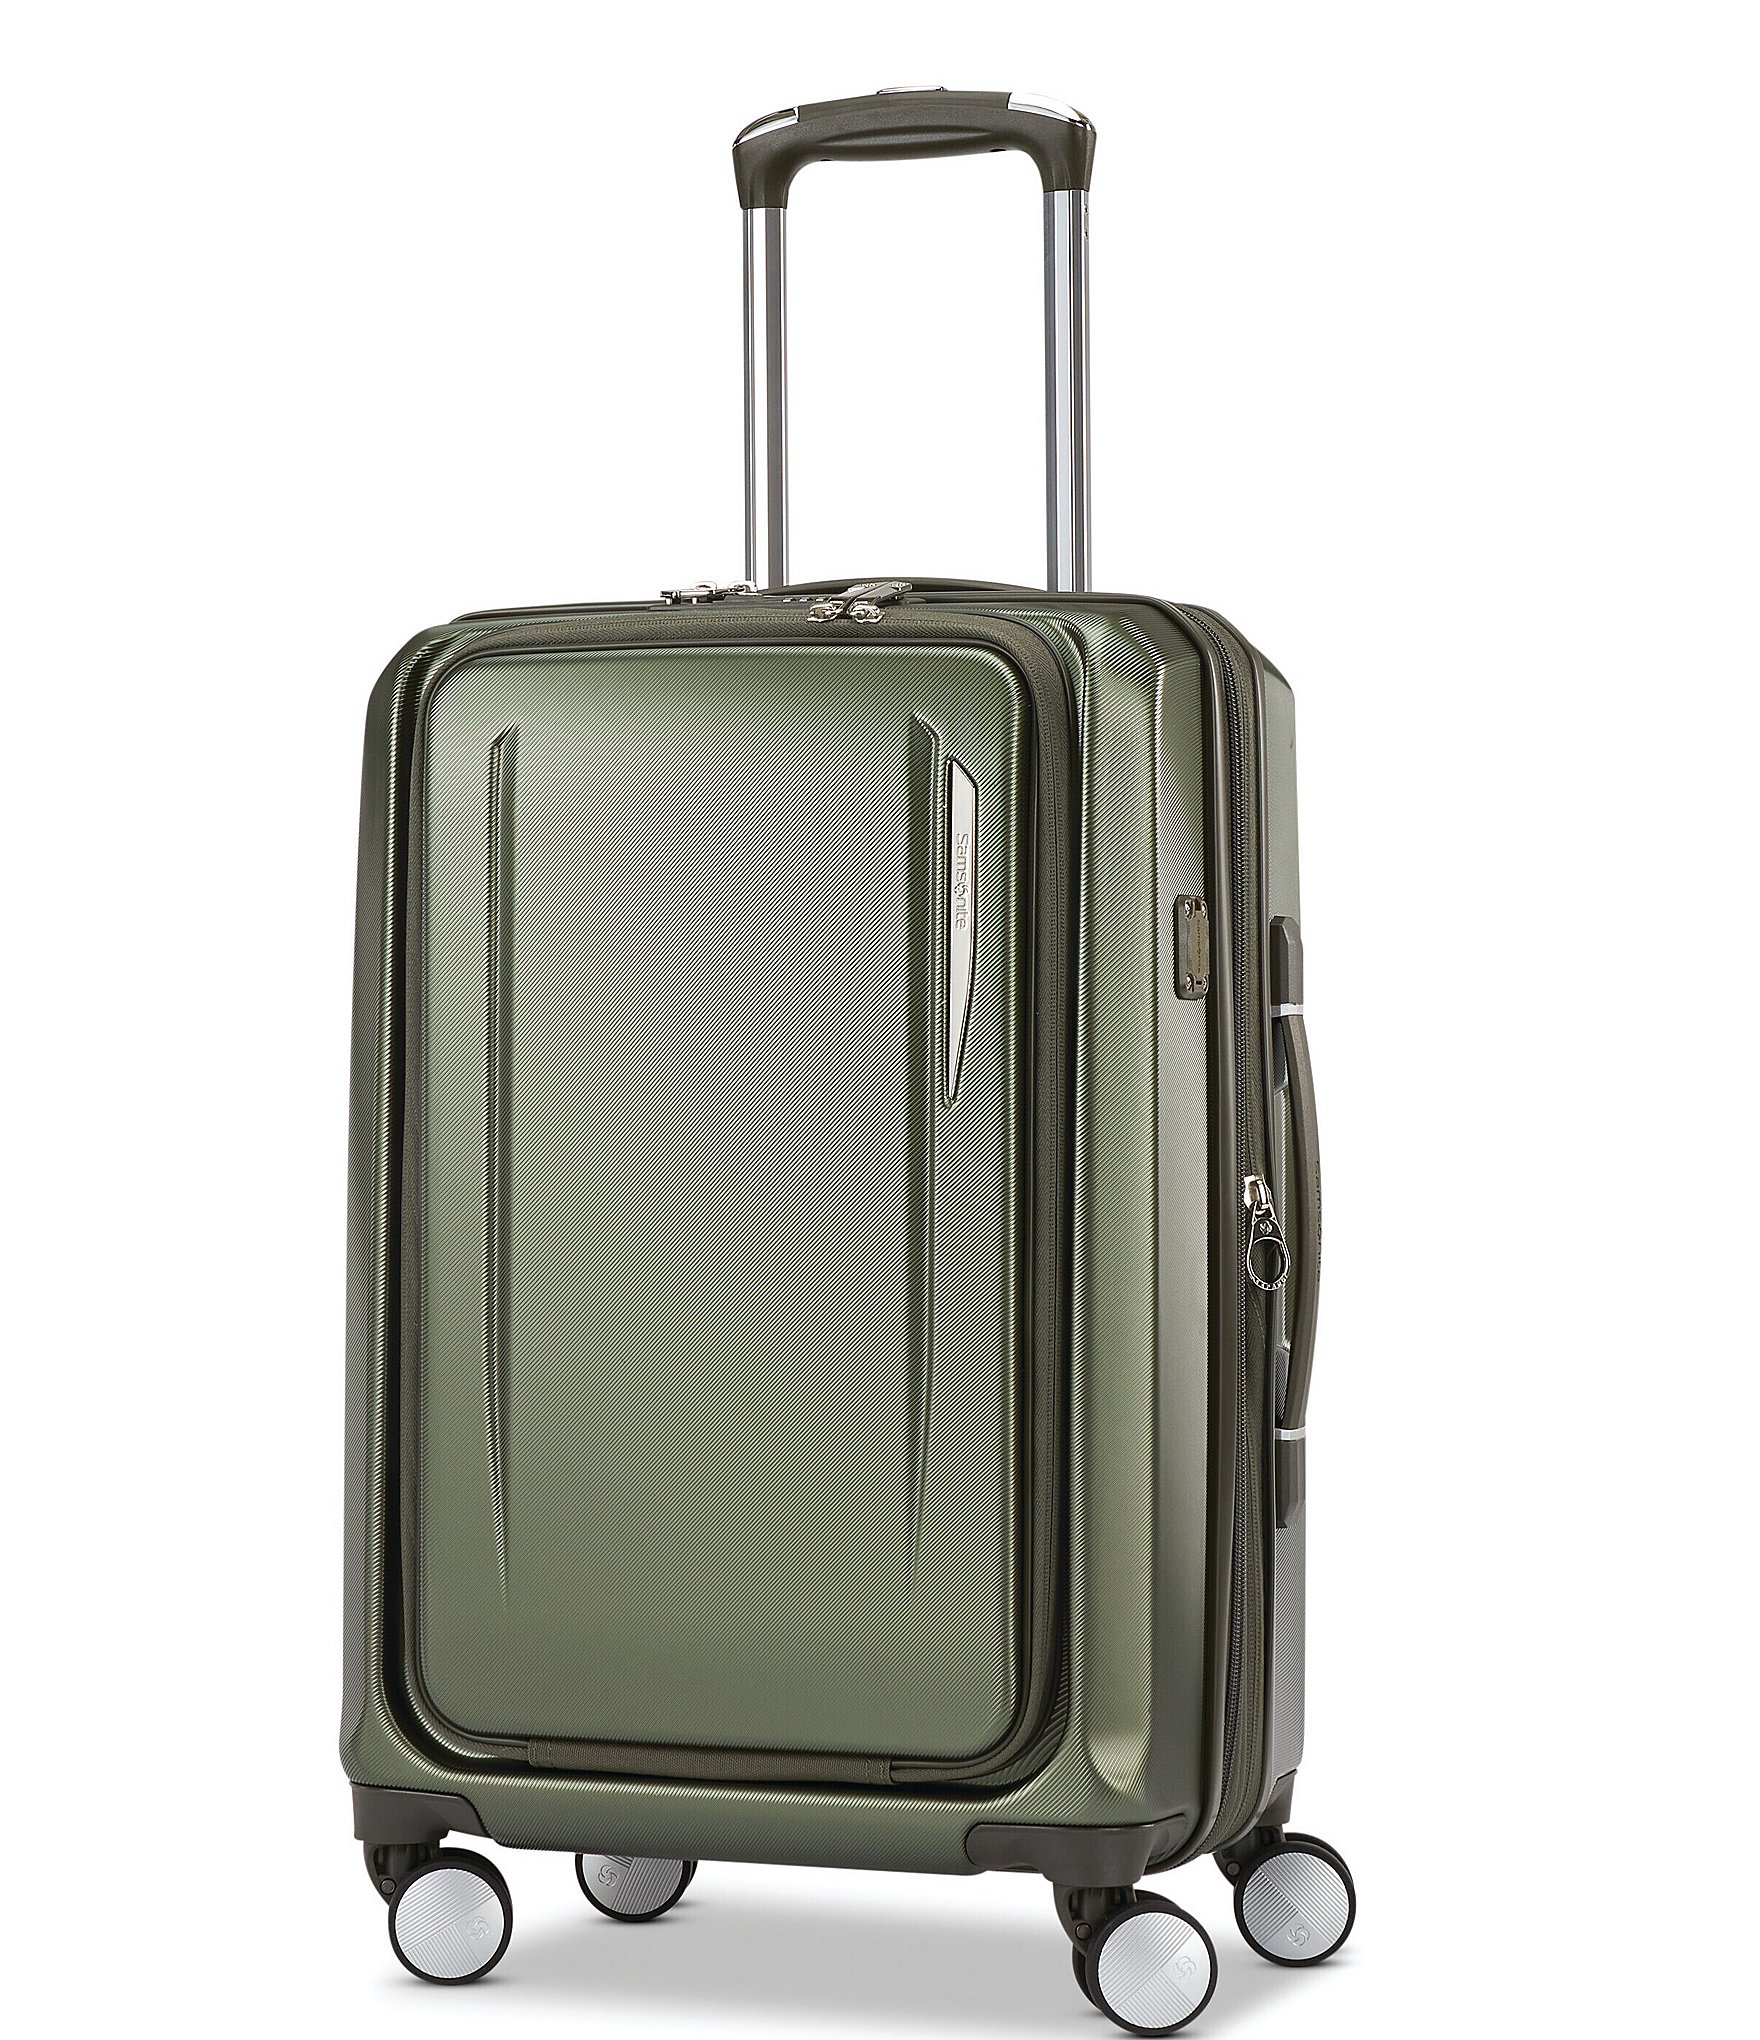 Samsonite Samsonite Just Right Collection CarryOn Expandable Spinner